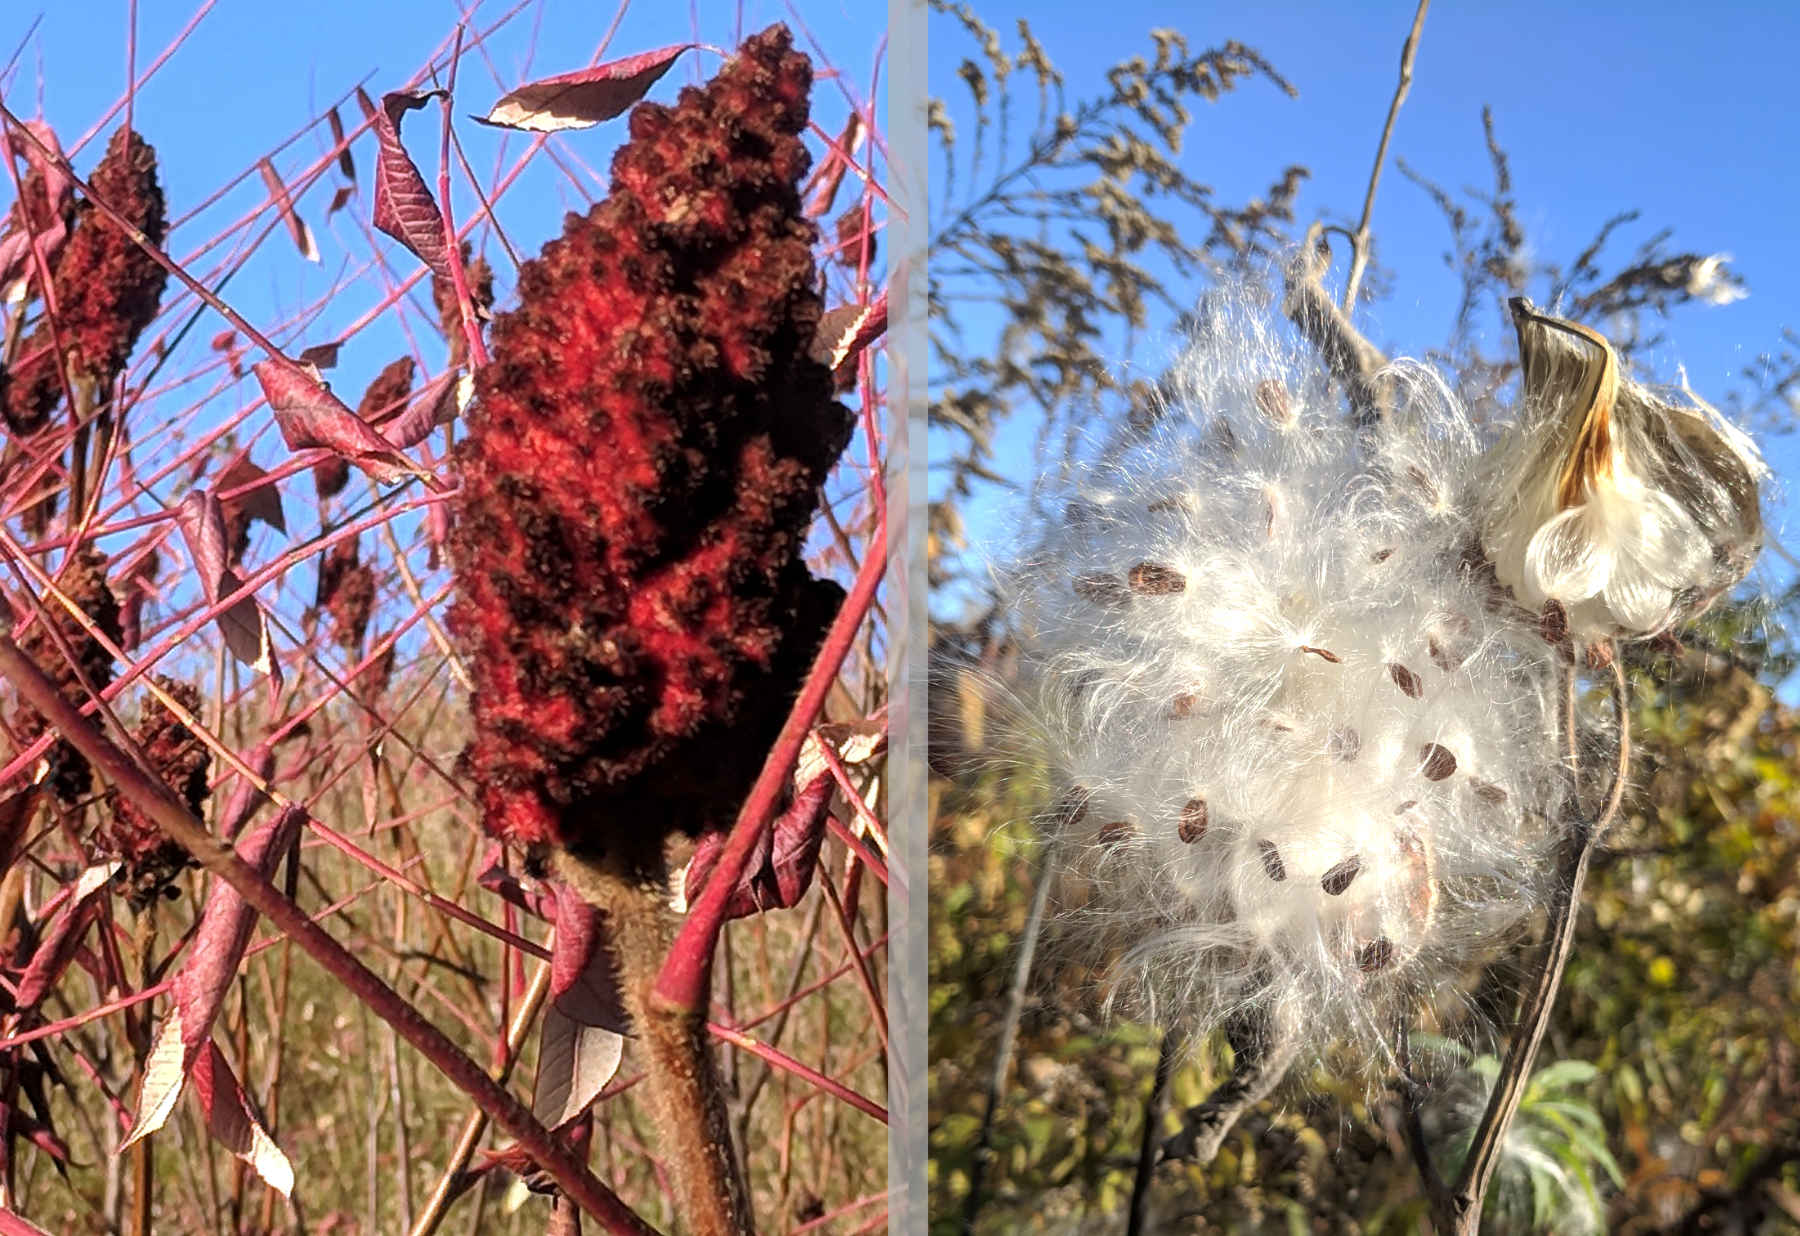 diptych of red sumac berries and feathery white milkweed pods